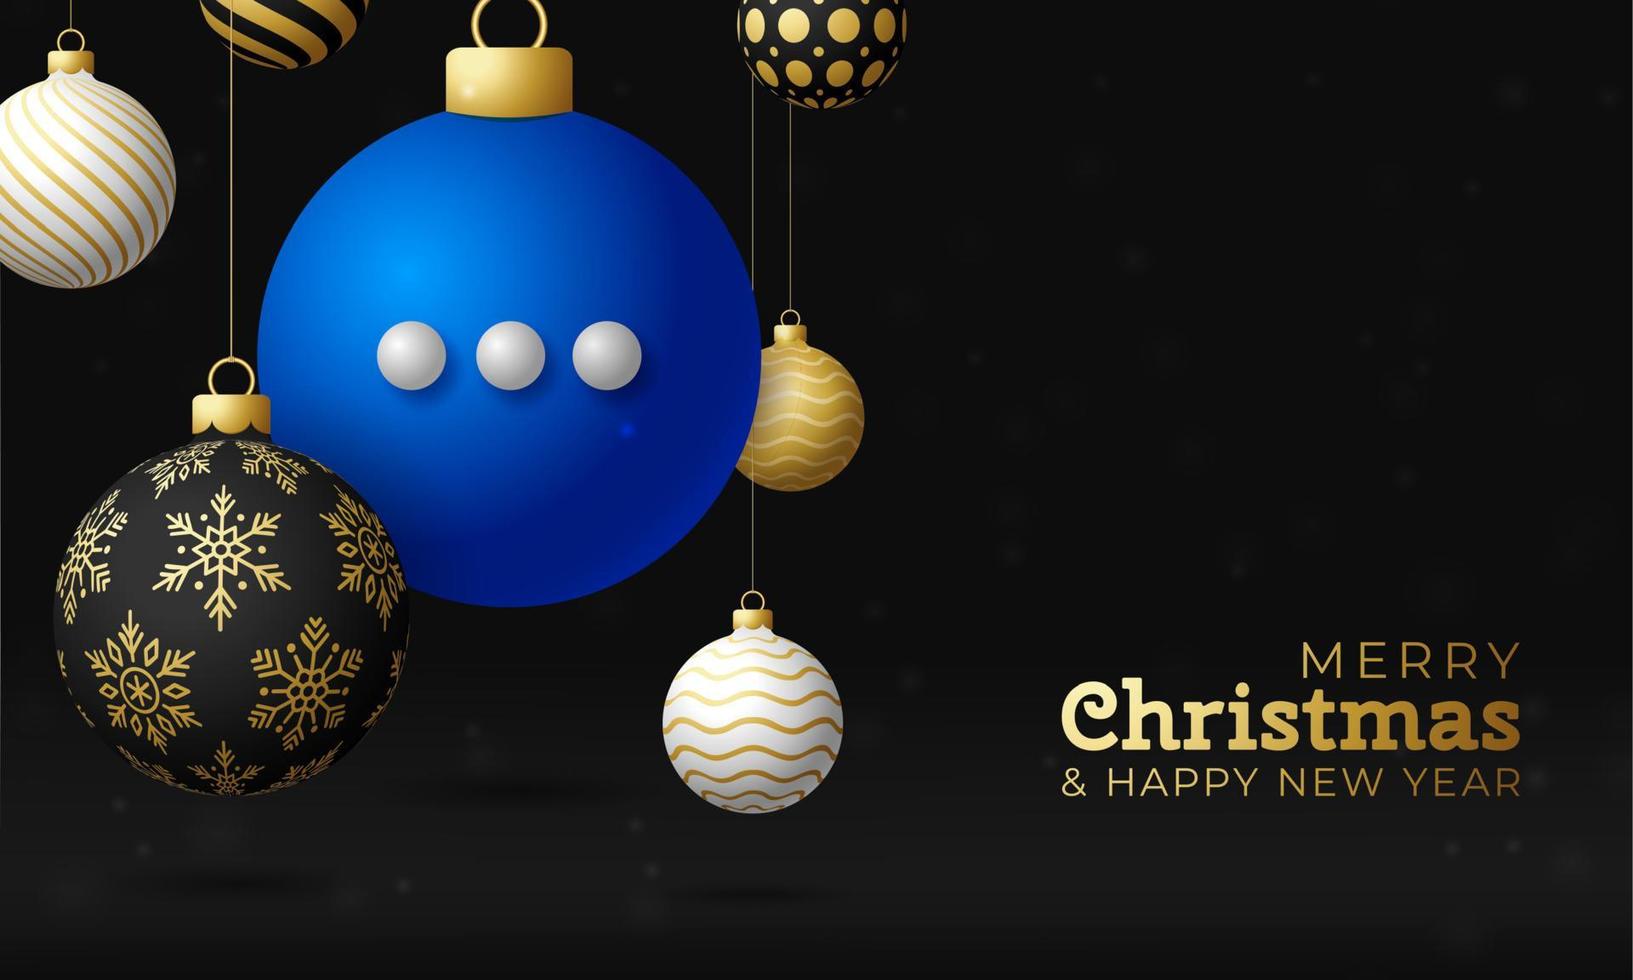 Chat Christmas card. Merry Christmas talk speak greeting card. Hang on a thread blue chat bubble as a xmas ball bauble on black background. Communication Vector illustration.